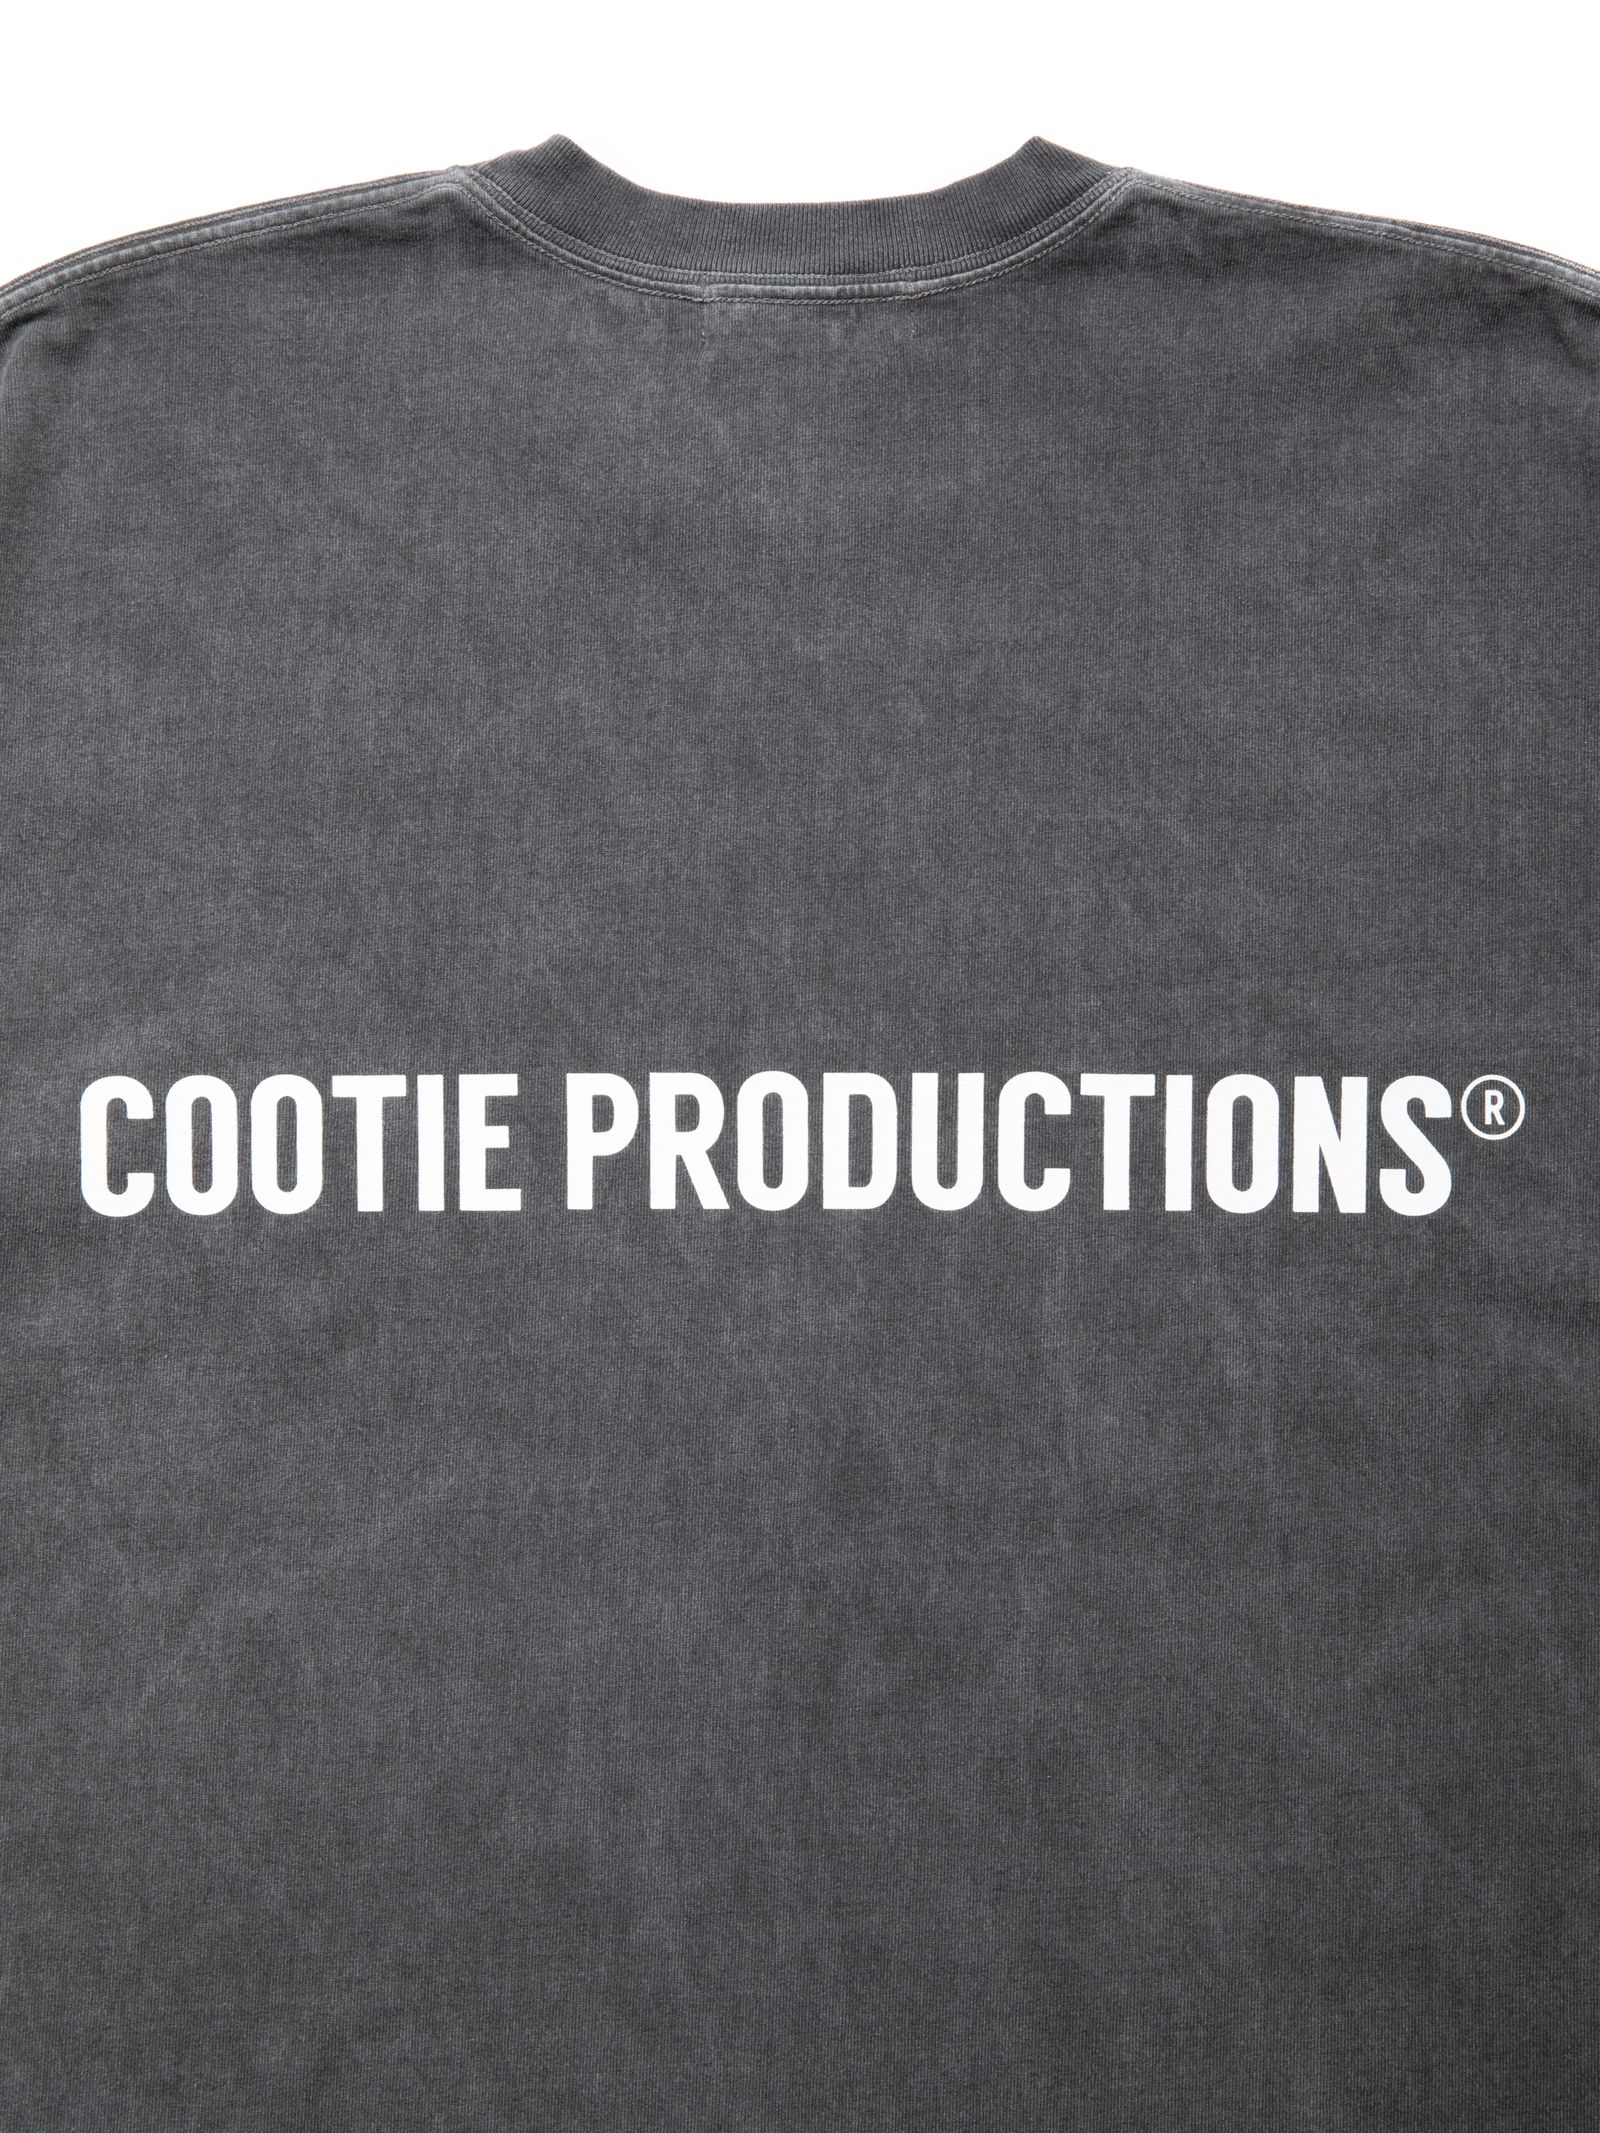 COOTIE PRODUCTIONS - Pigment Dyed L/S Tee / Black / ピグメント 